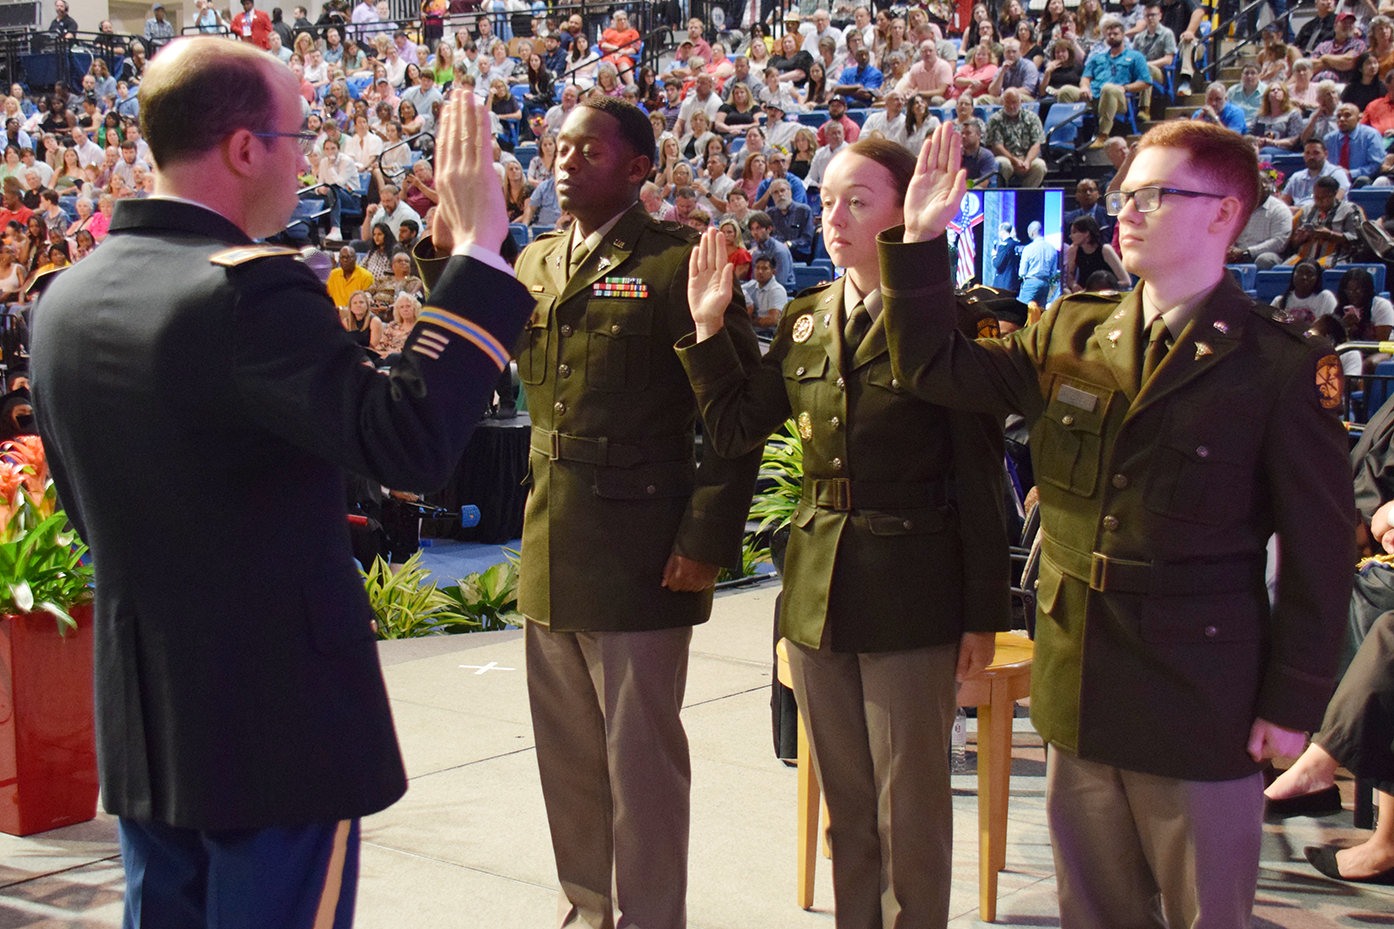 Interim President and Army National Guard Col. John M. Fuchko III administers the oath of office to commissioning cadets at the College of Education & Health Professions commencement ceremony